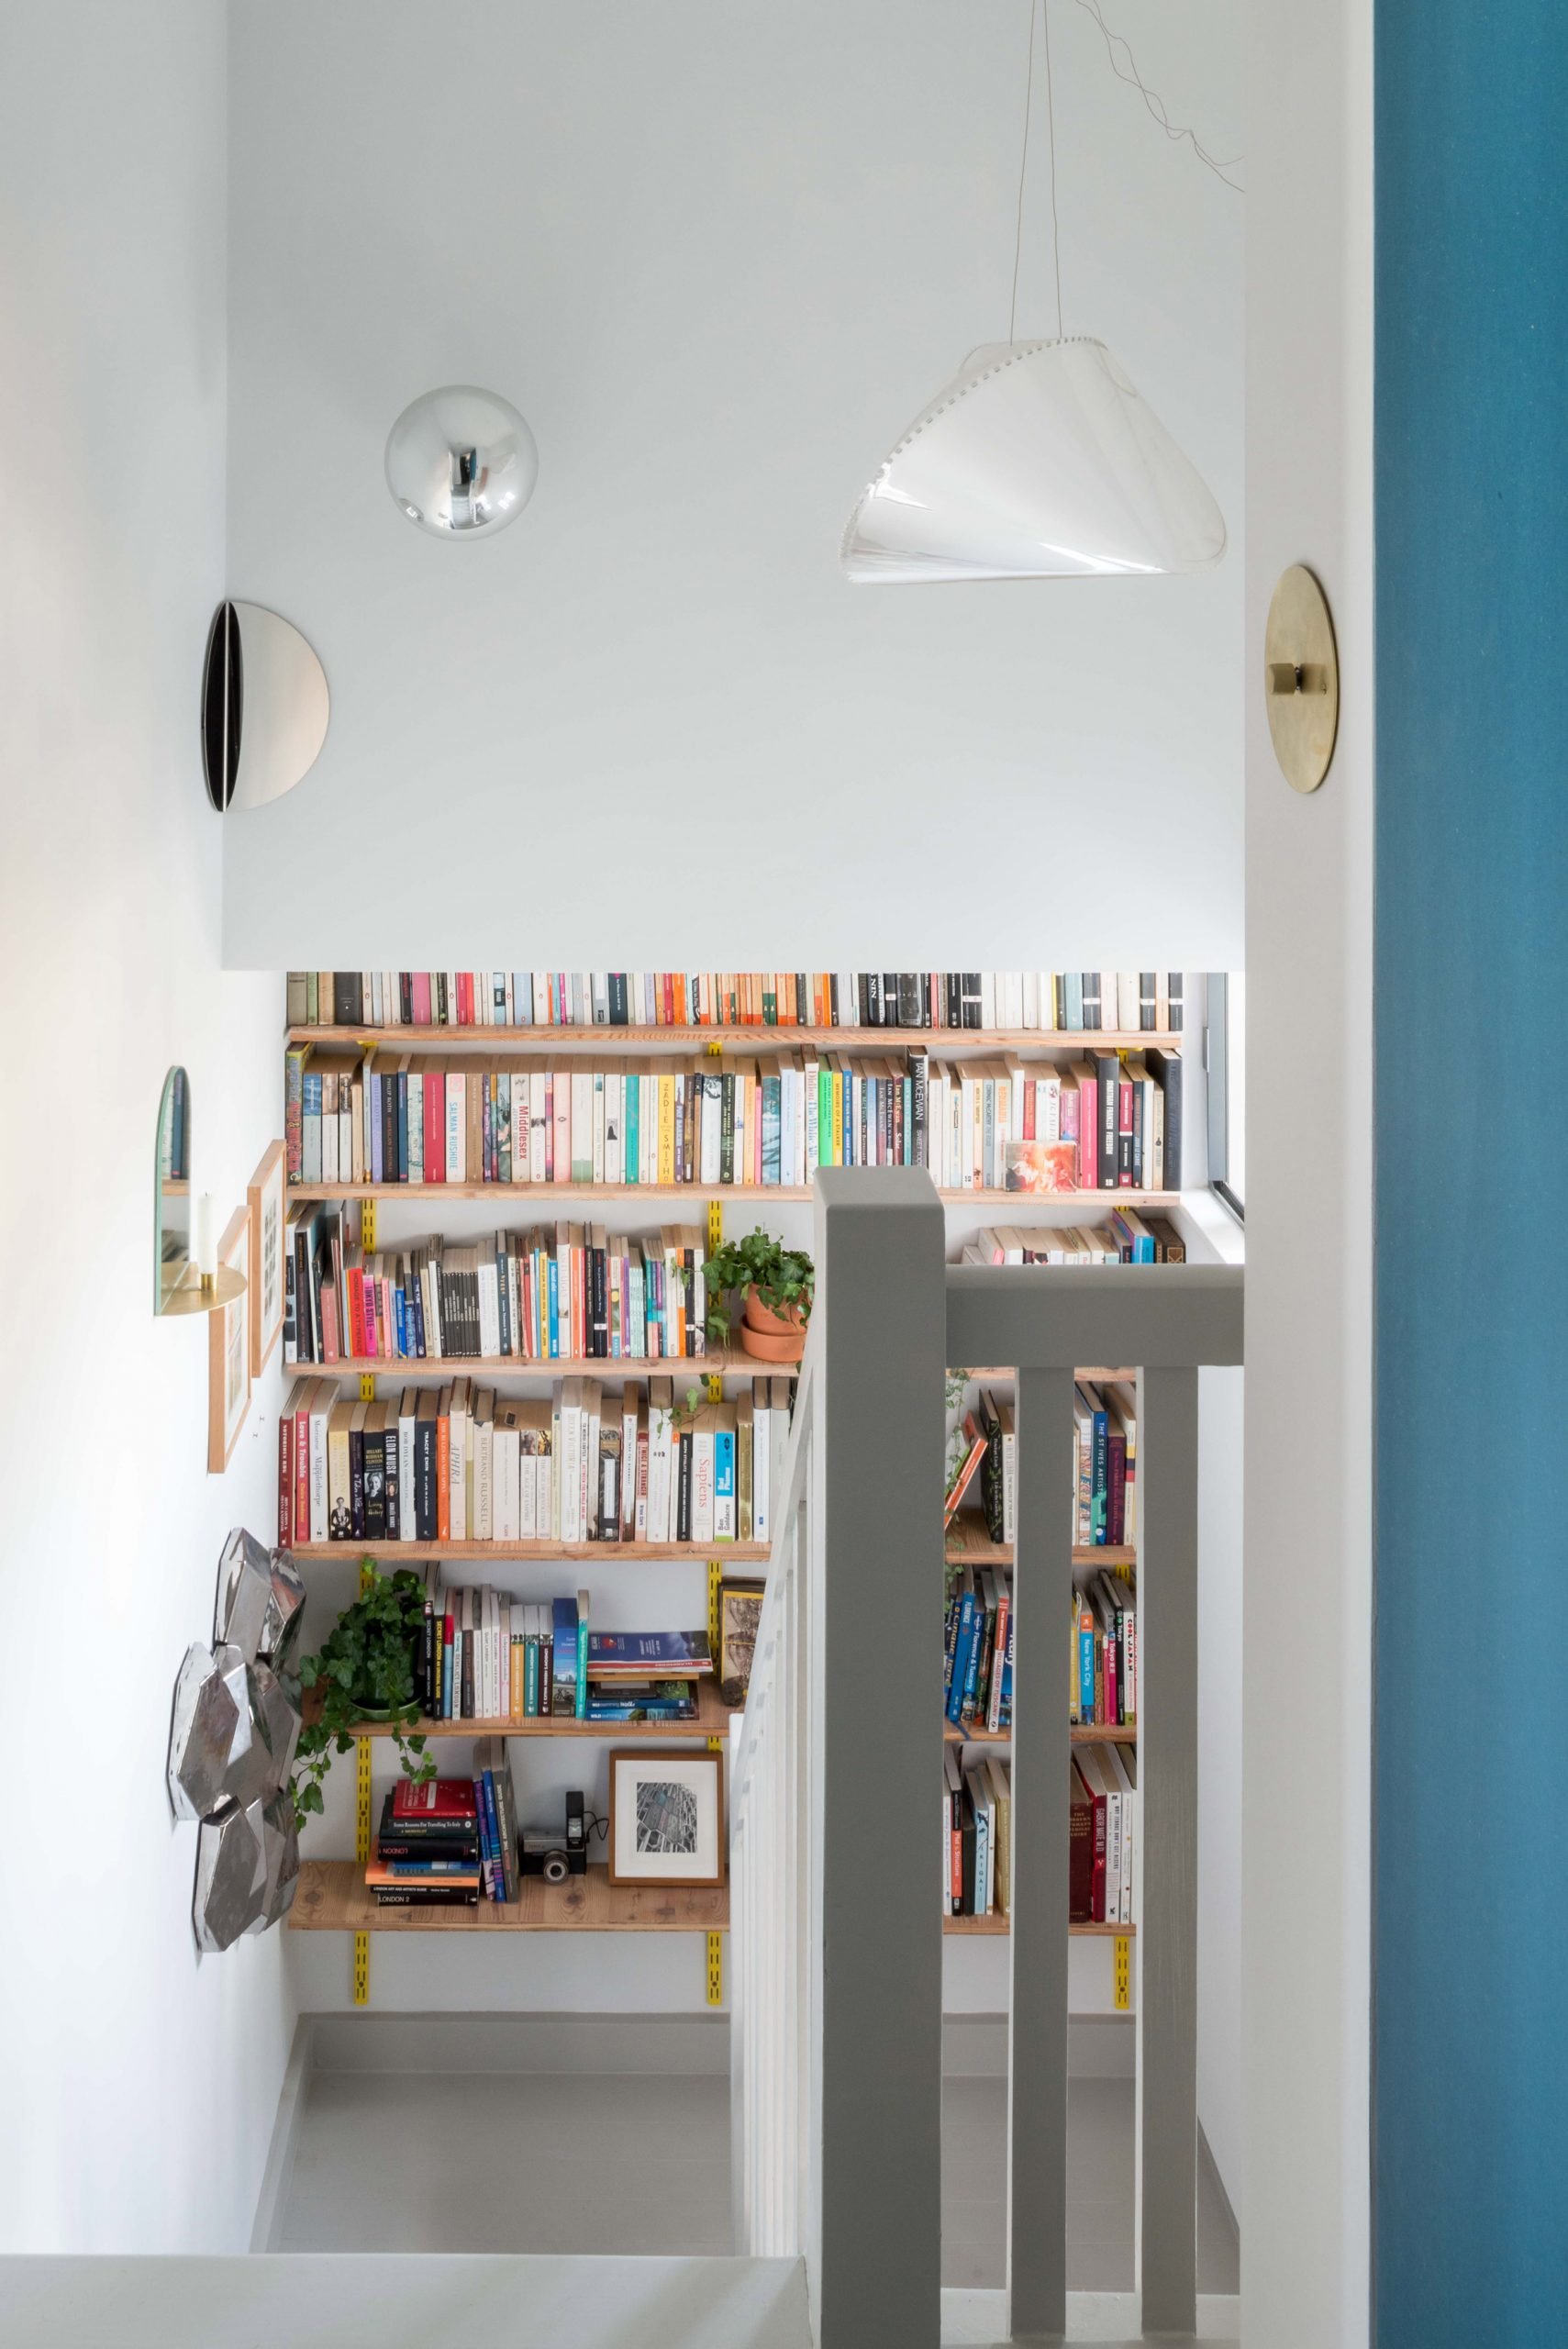 Architect Ben Allen's London flat includes art from Olafur Eliasson in the stairwell